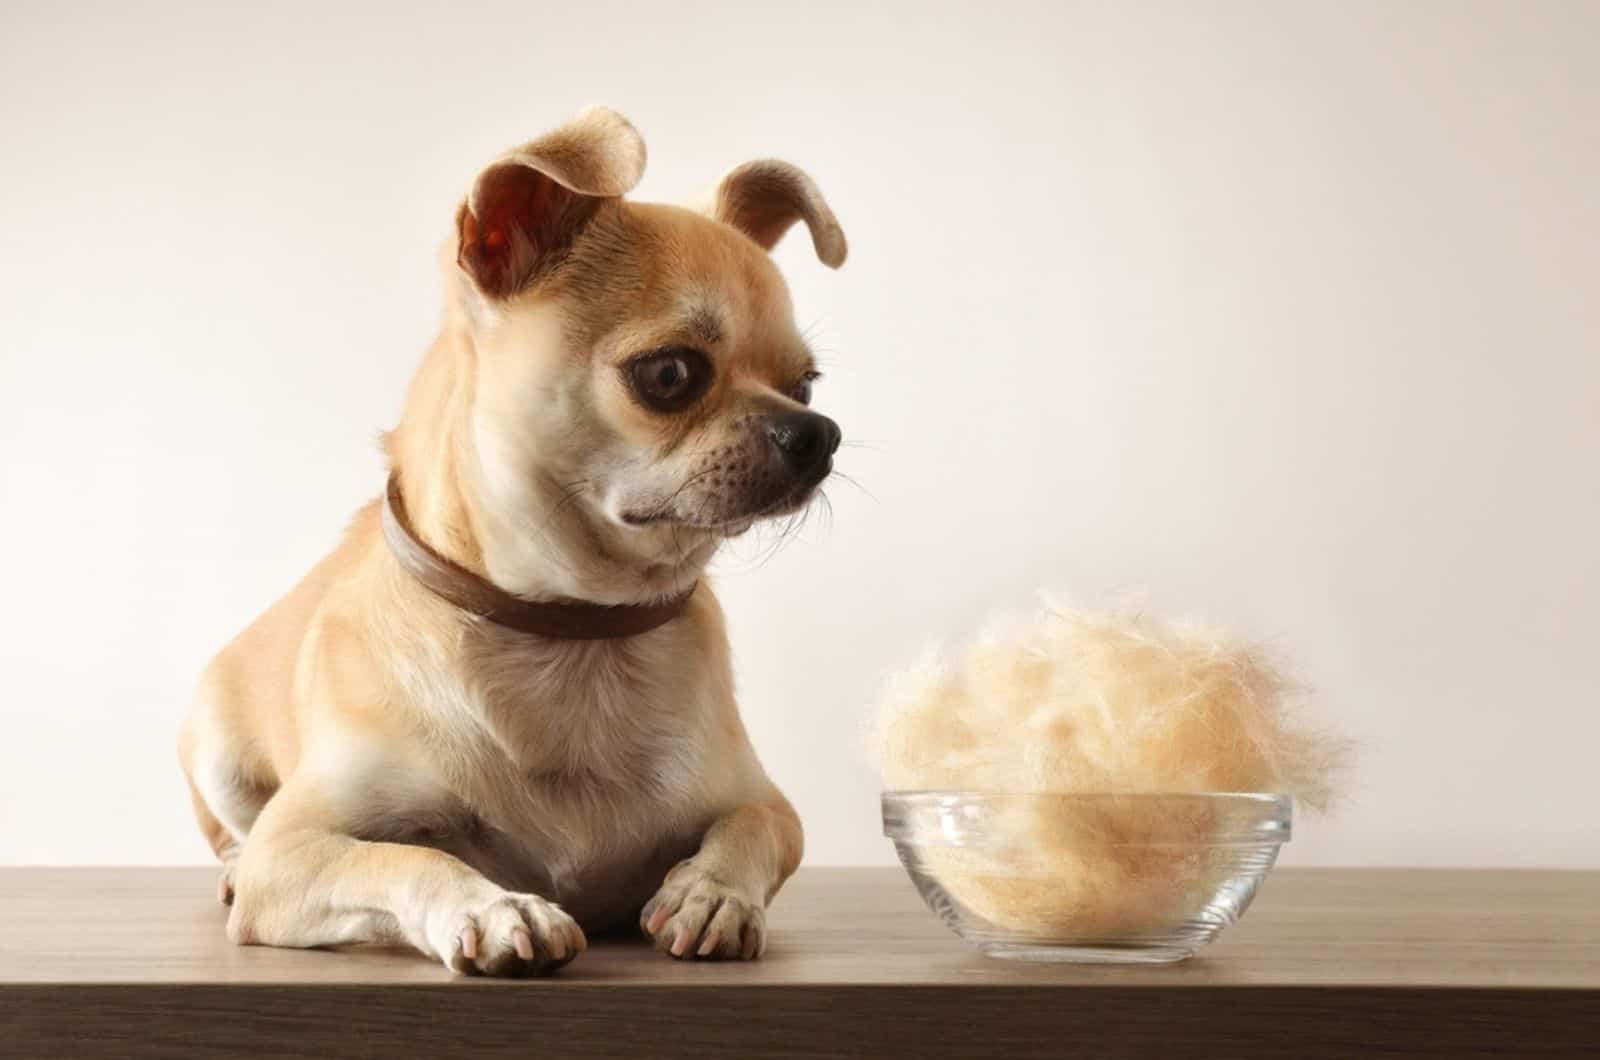 chihuahua and glass bowl full of hair on wooden table